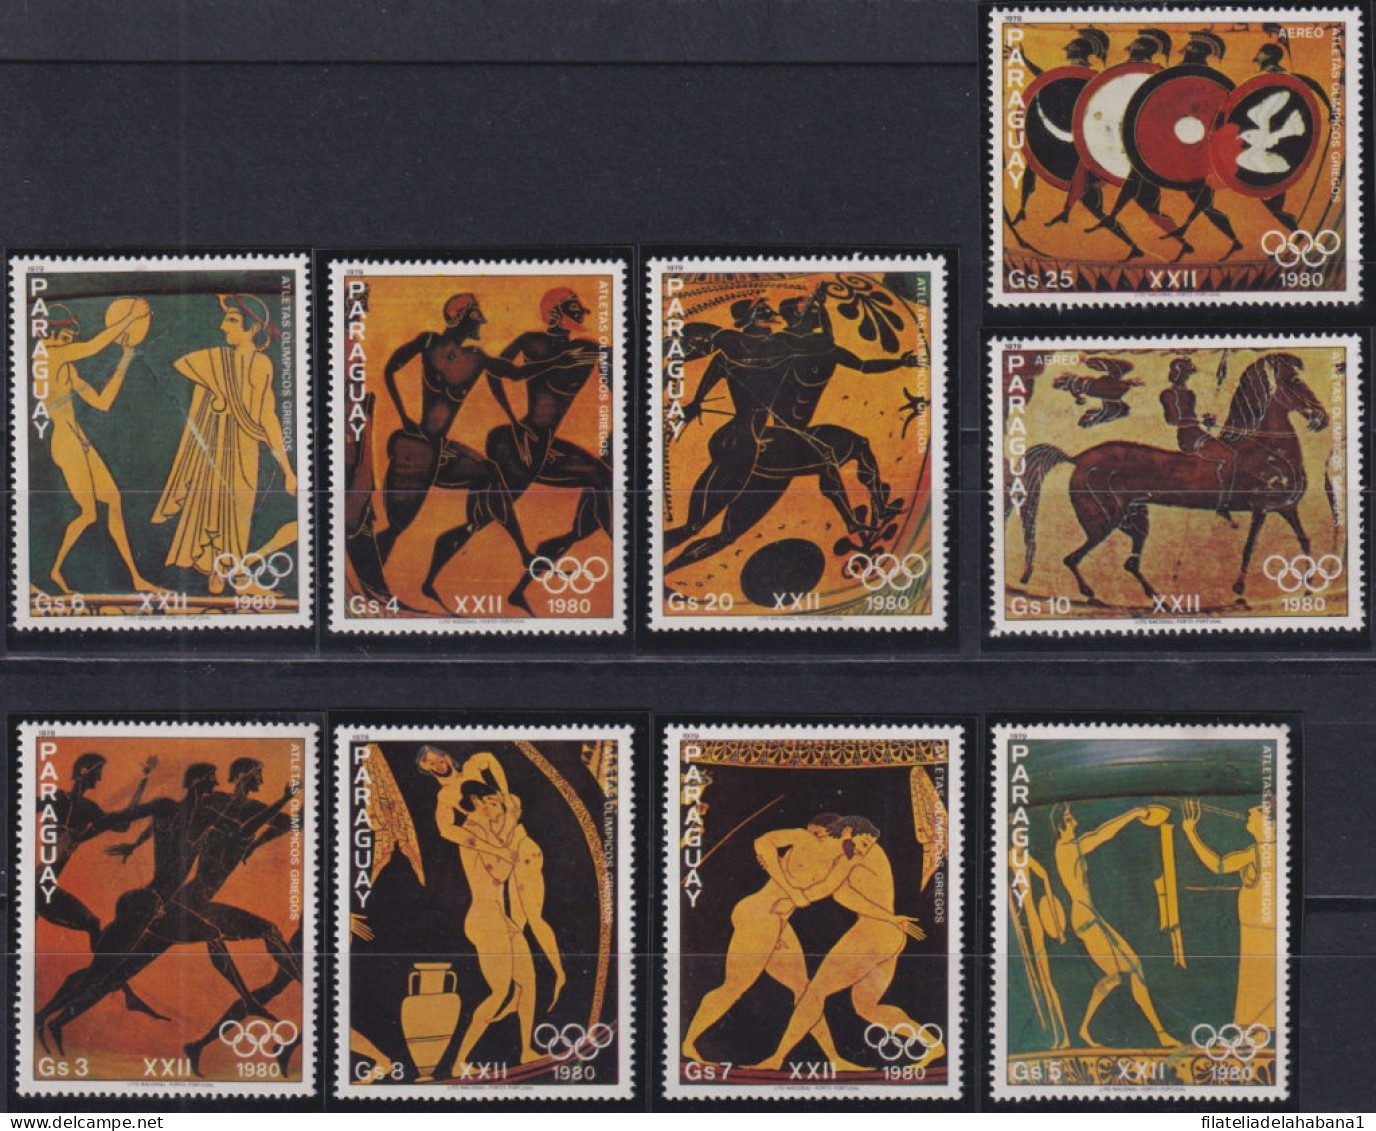 F-EX49811 PARAGUAY MNH 1980 OLYMPIC GAMES ARCHEOLOGY GREECE DRAWING SPORT.  - Ete 1980: Moscou